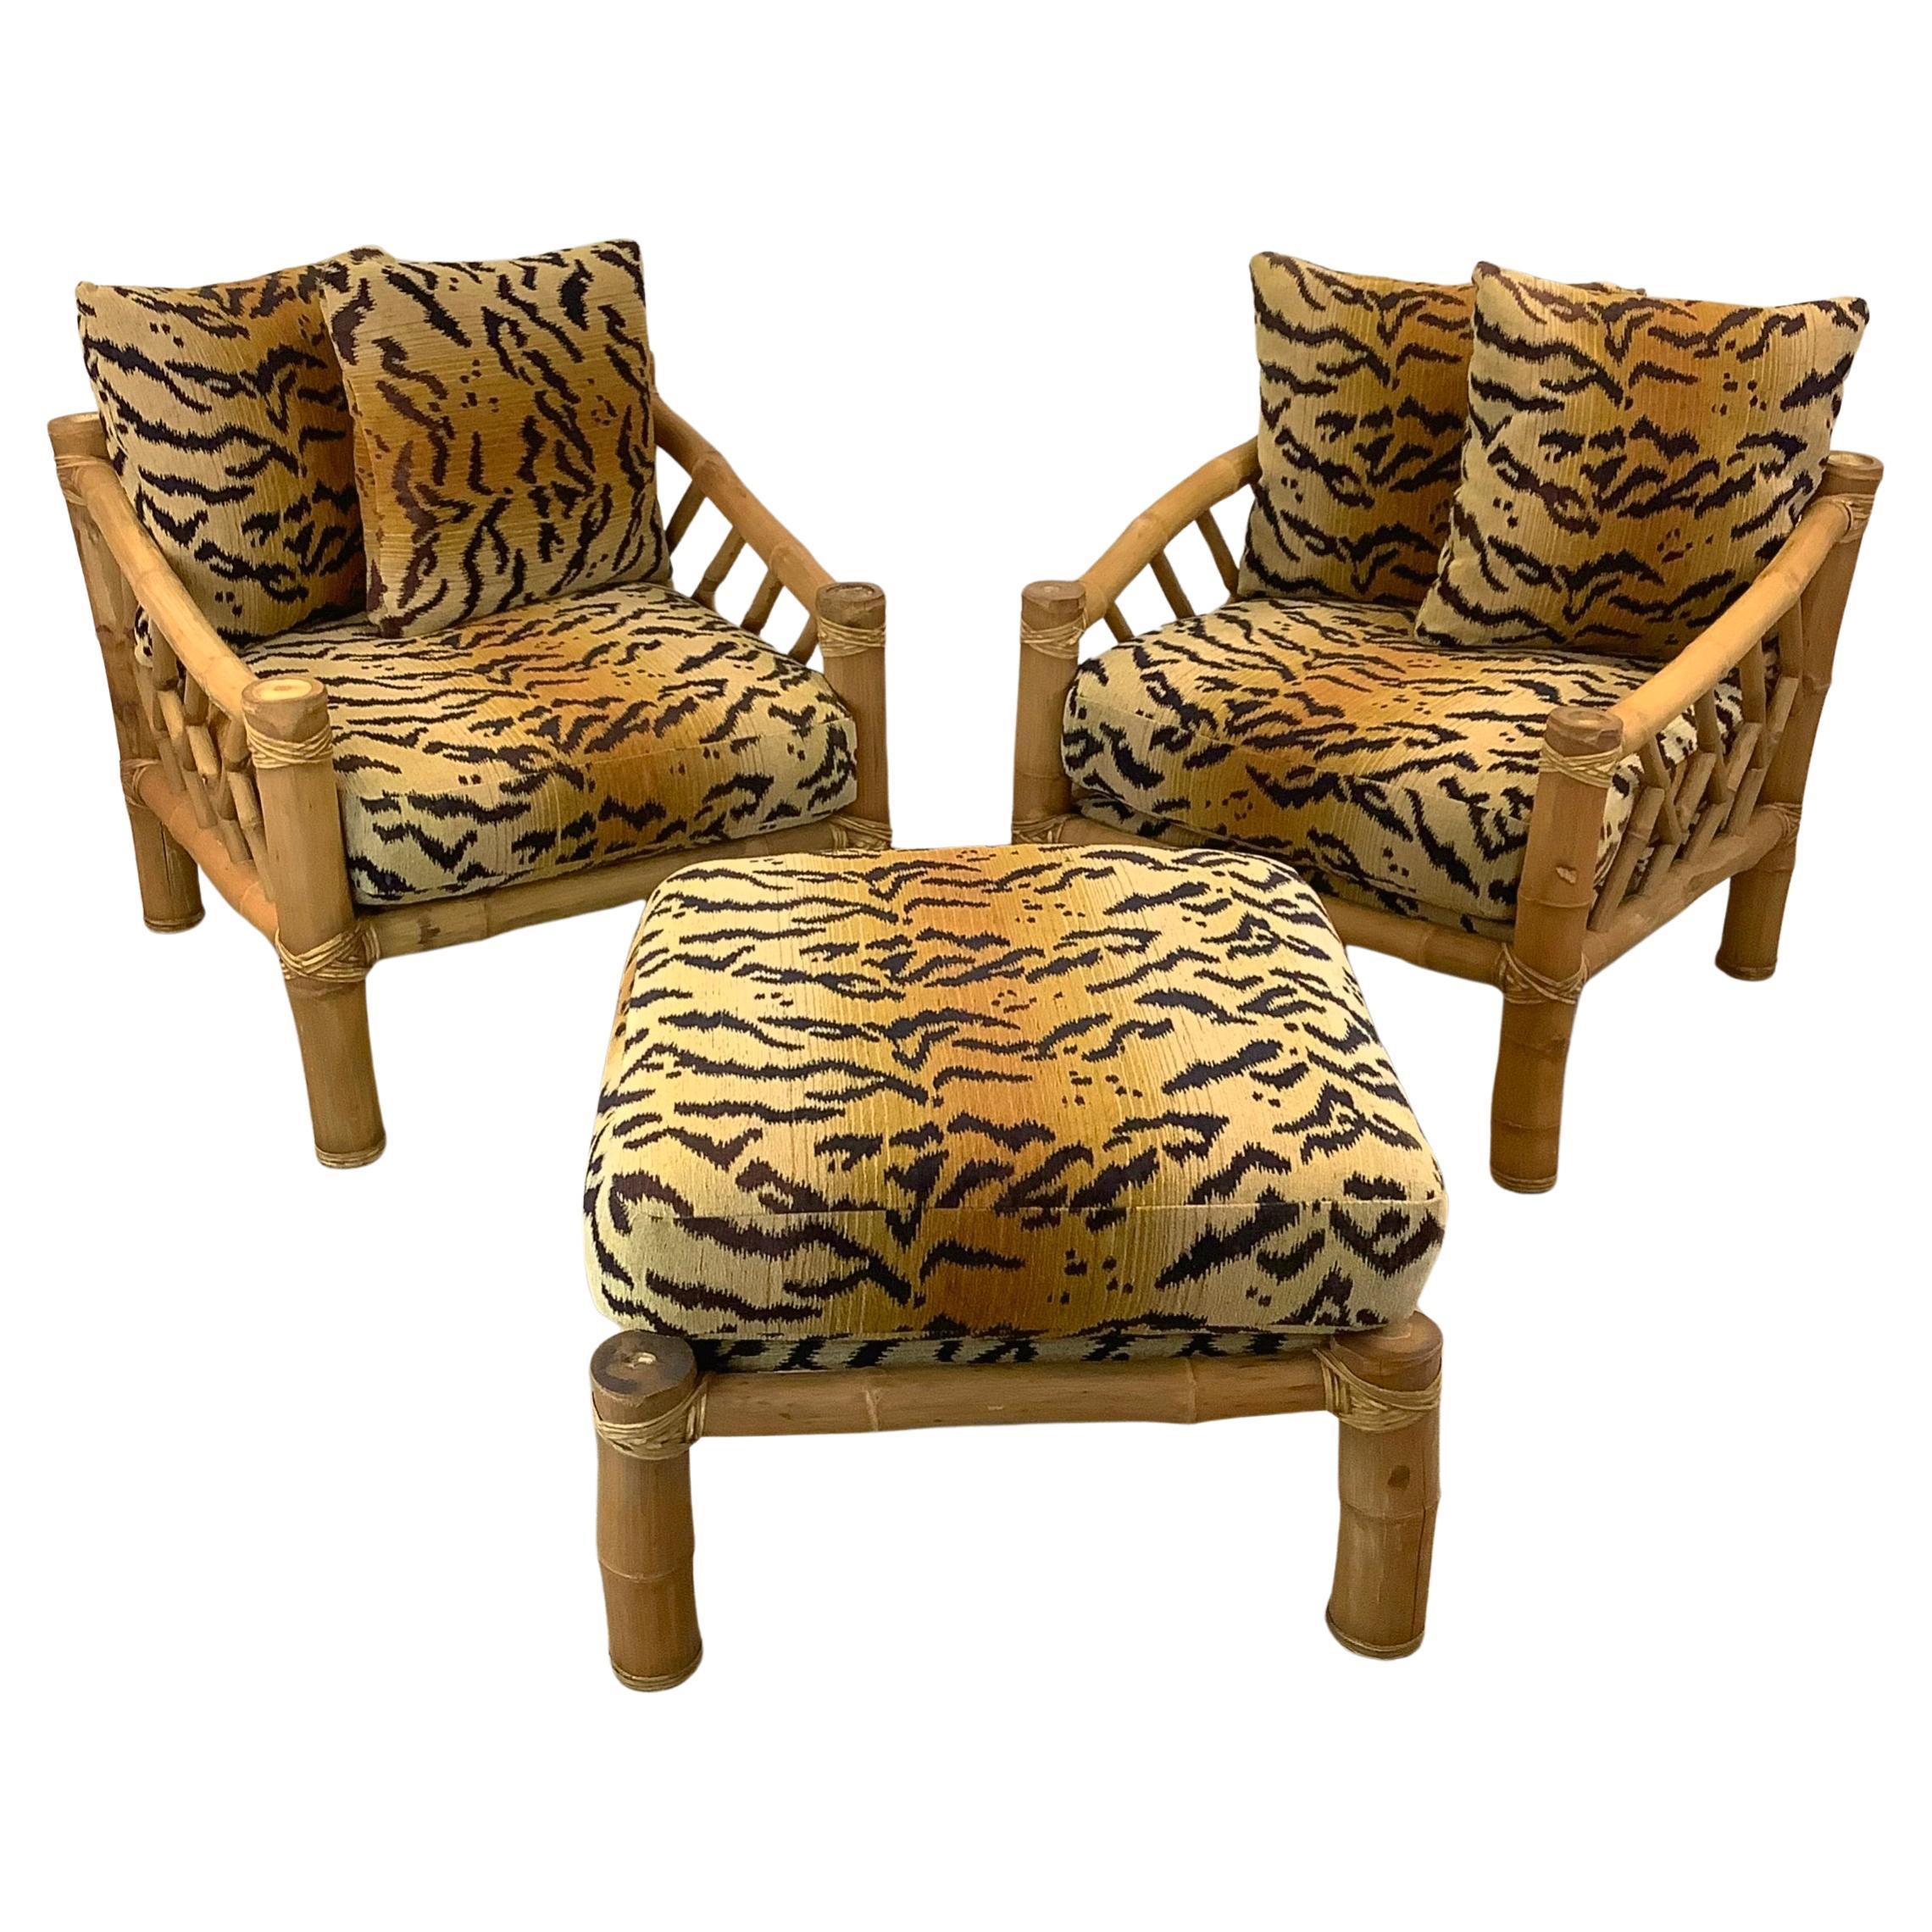 Pair Vintage Bamboo Armchairs & Ottoman in Tiger Print For Sale